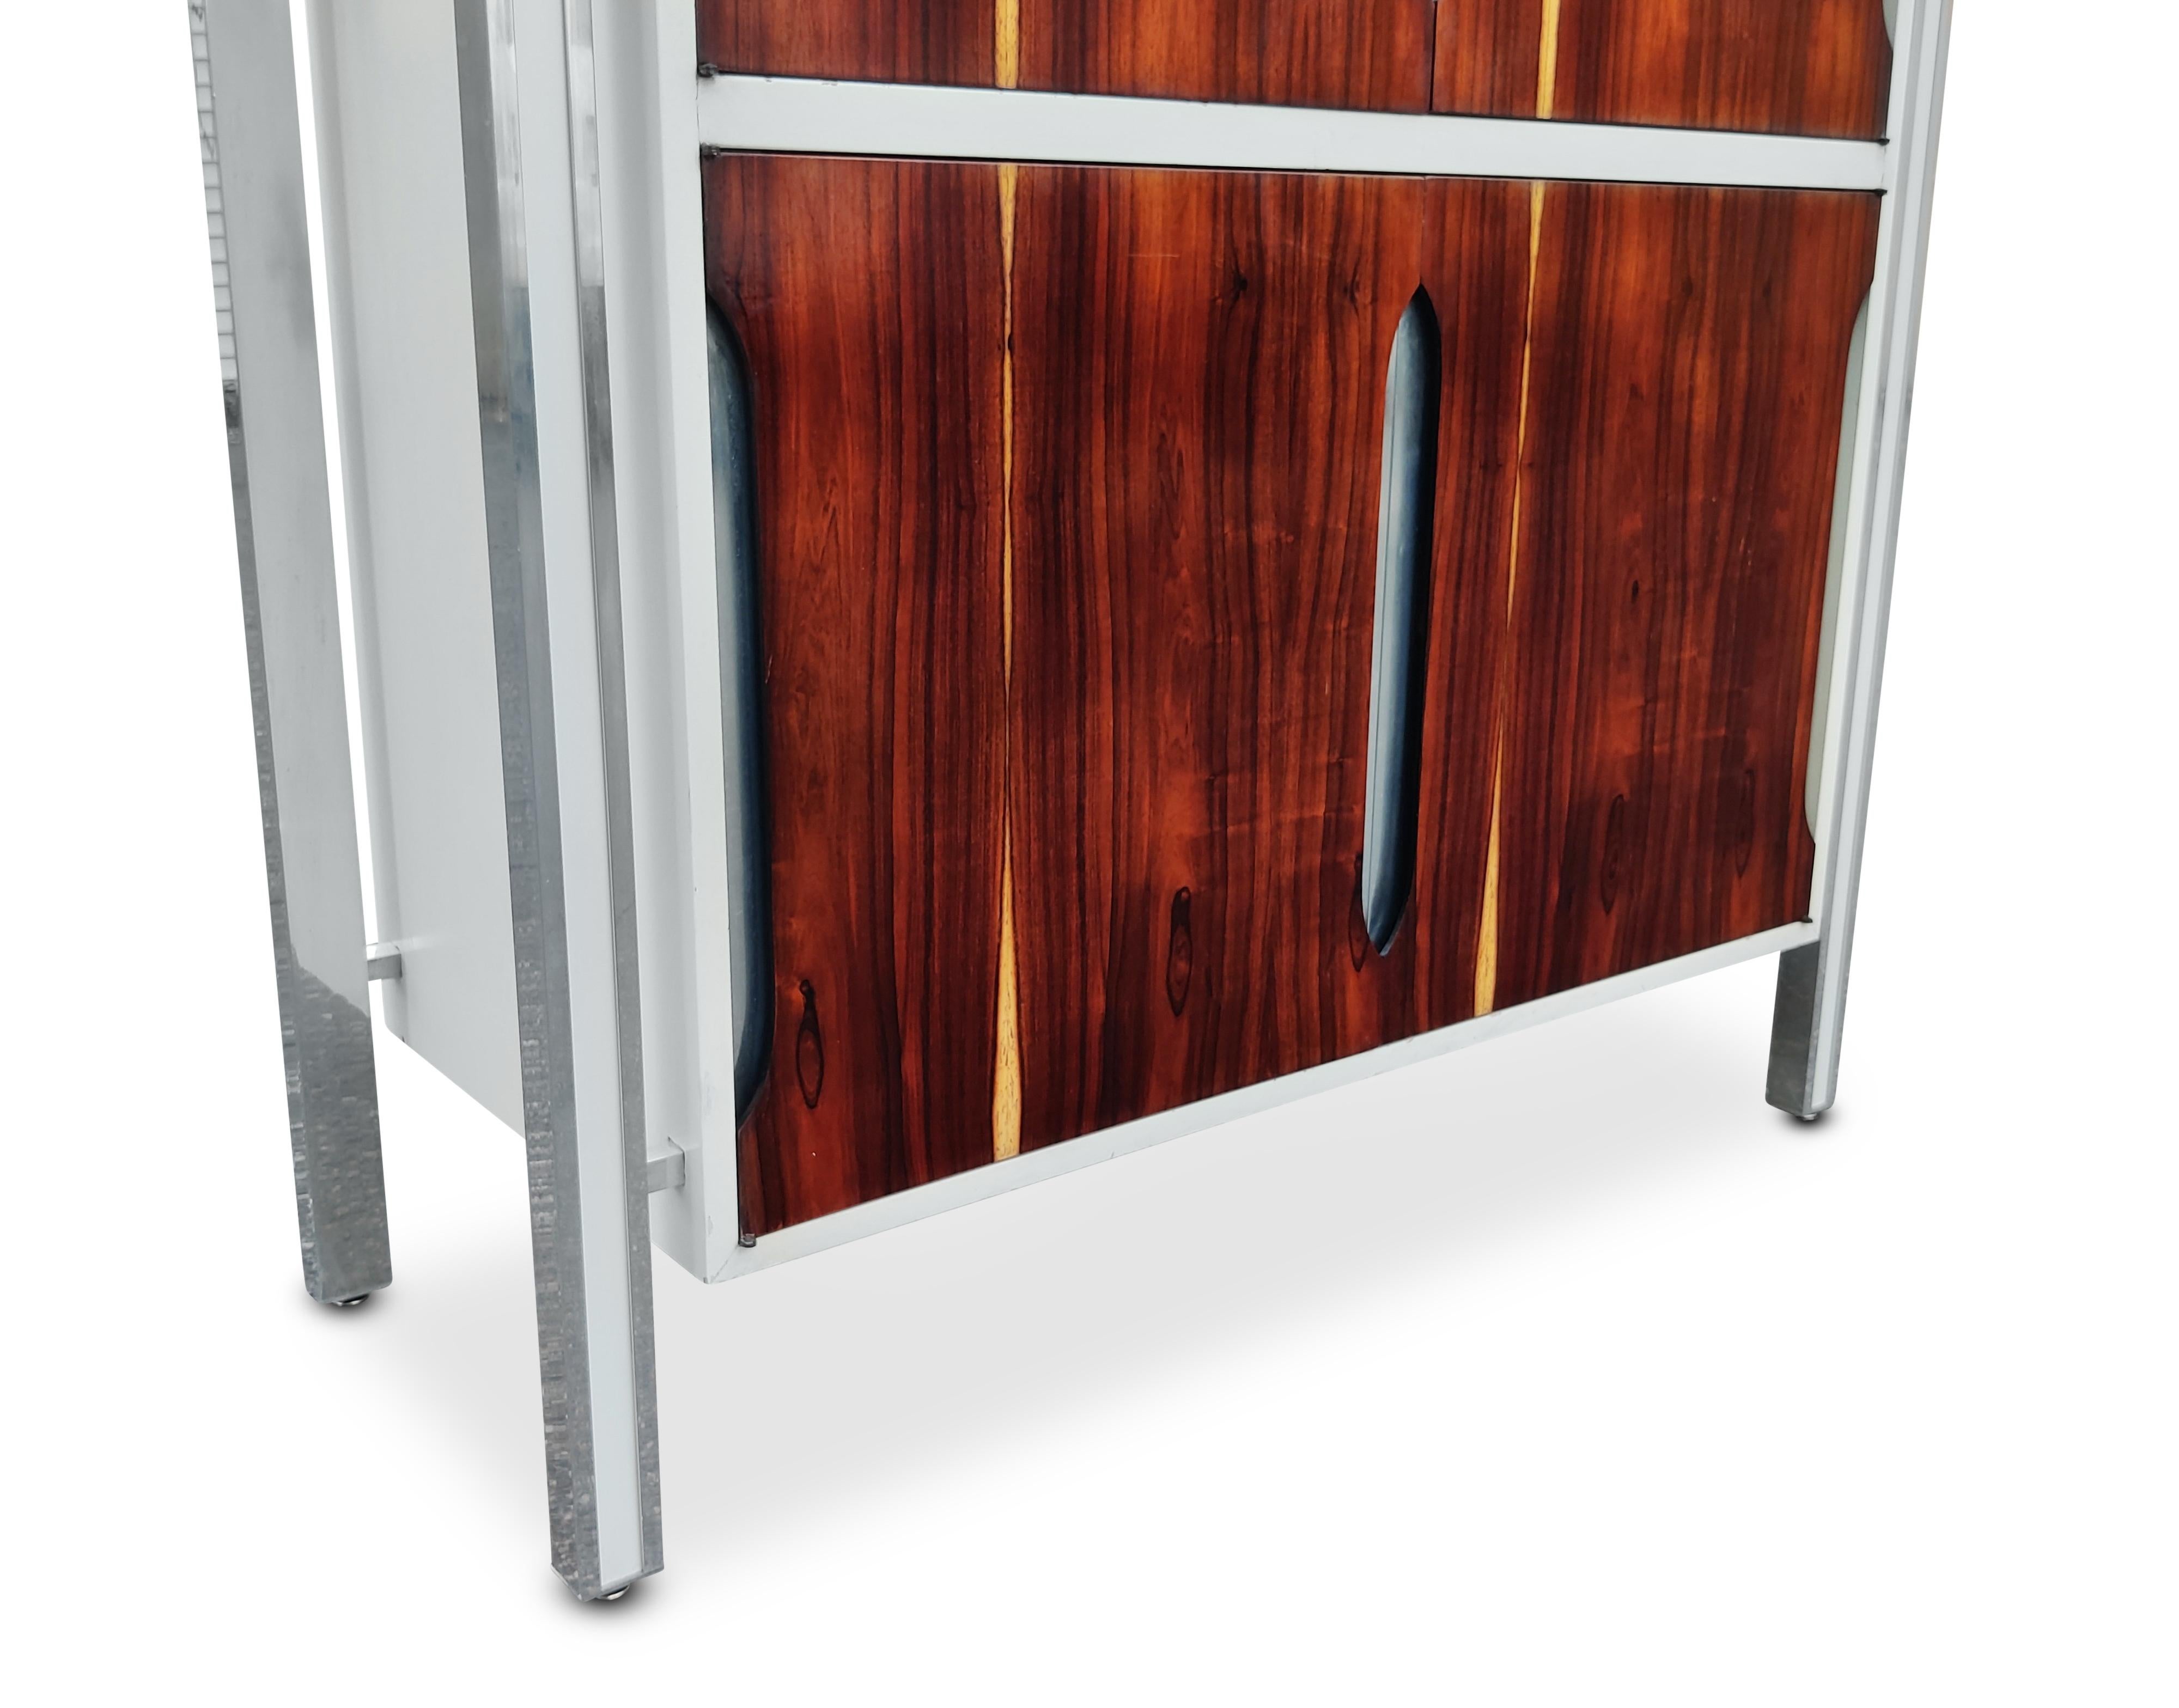 Mid-20th Century 1970s Milo Baughman Style Rosewood, Laminate, and Aluminum Tall Dresser/Cabinet For Sale